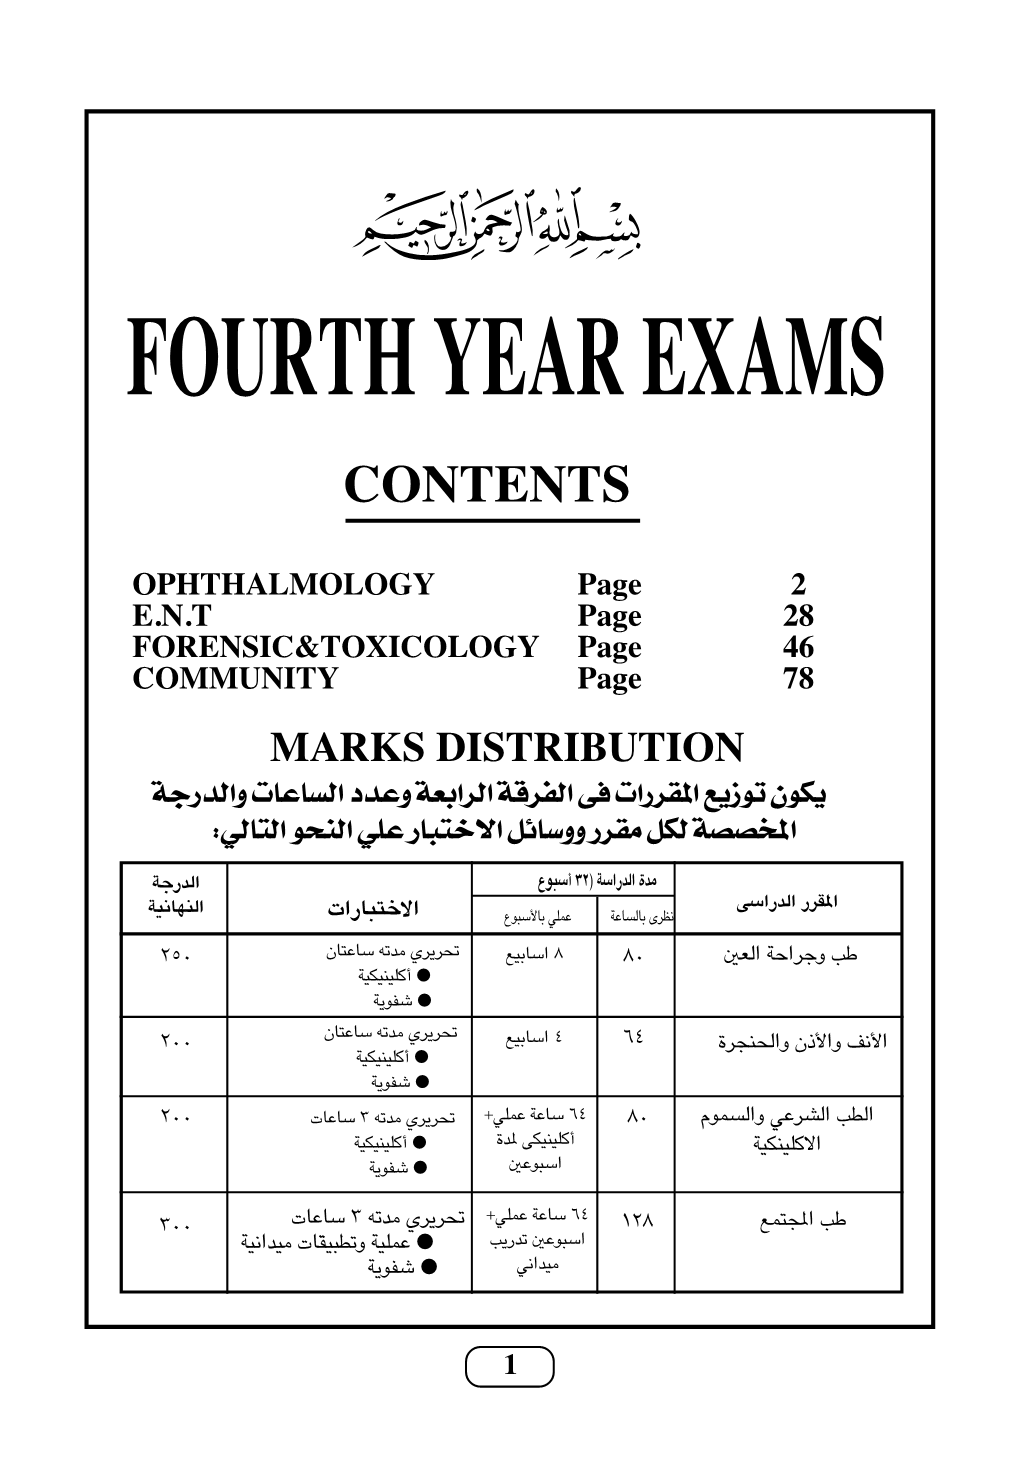 Fourth Year Exams Contents